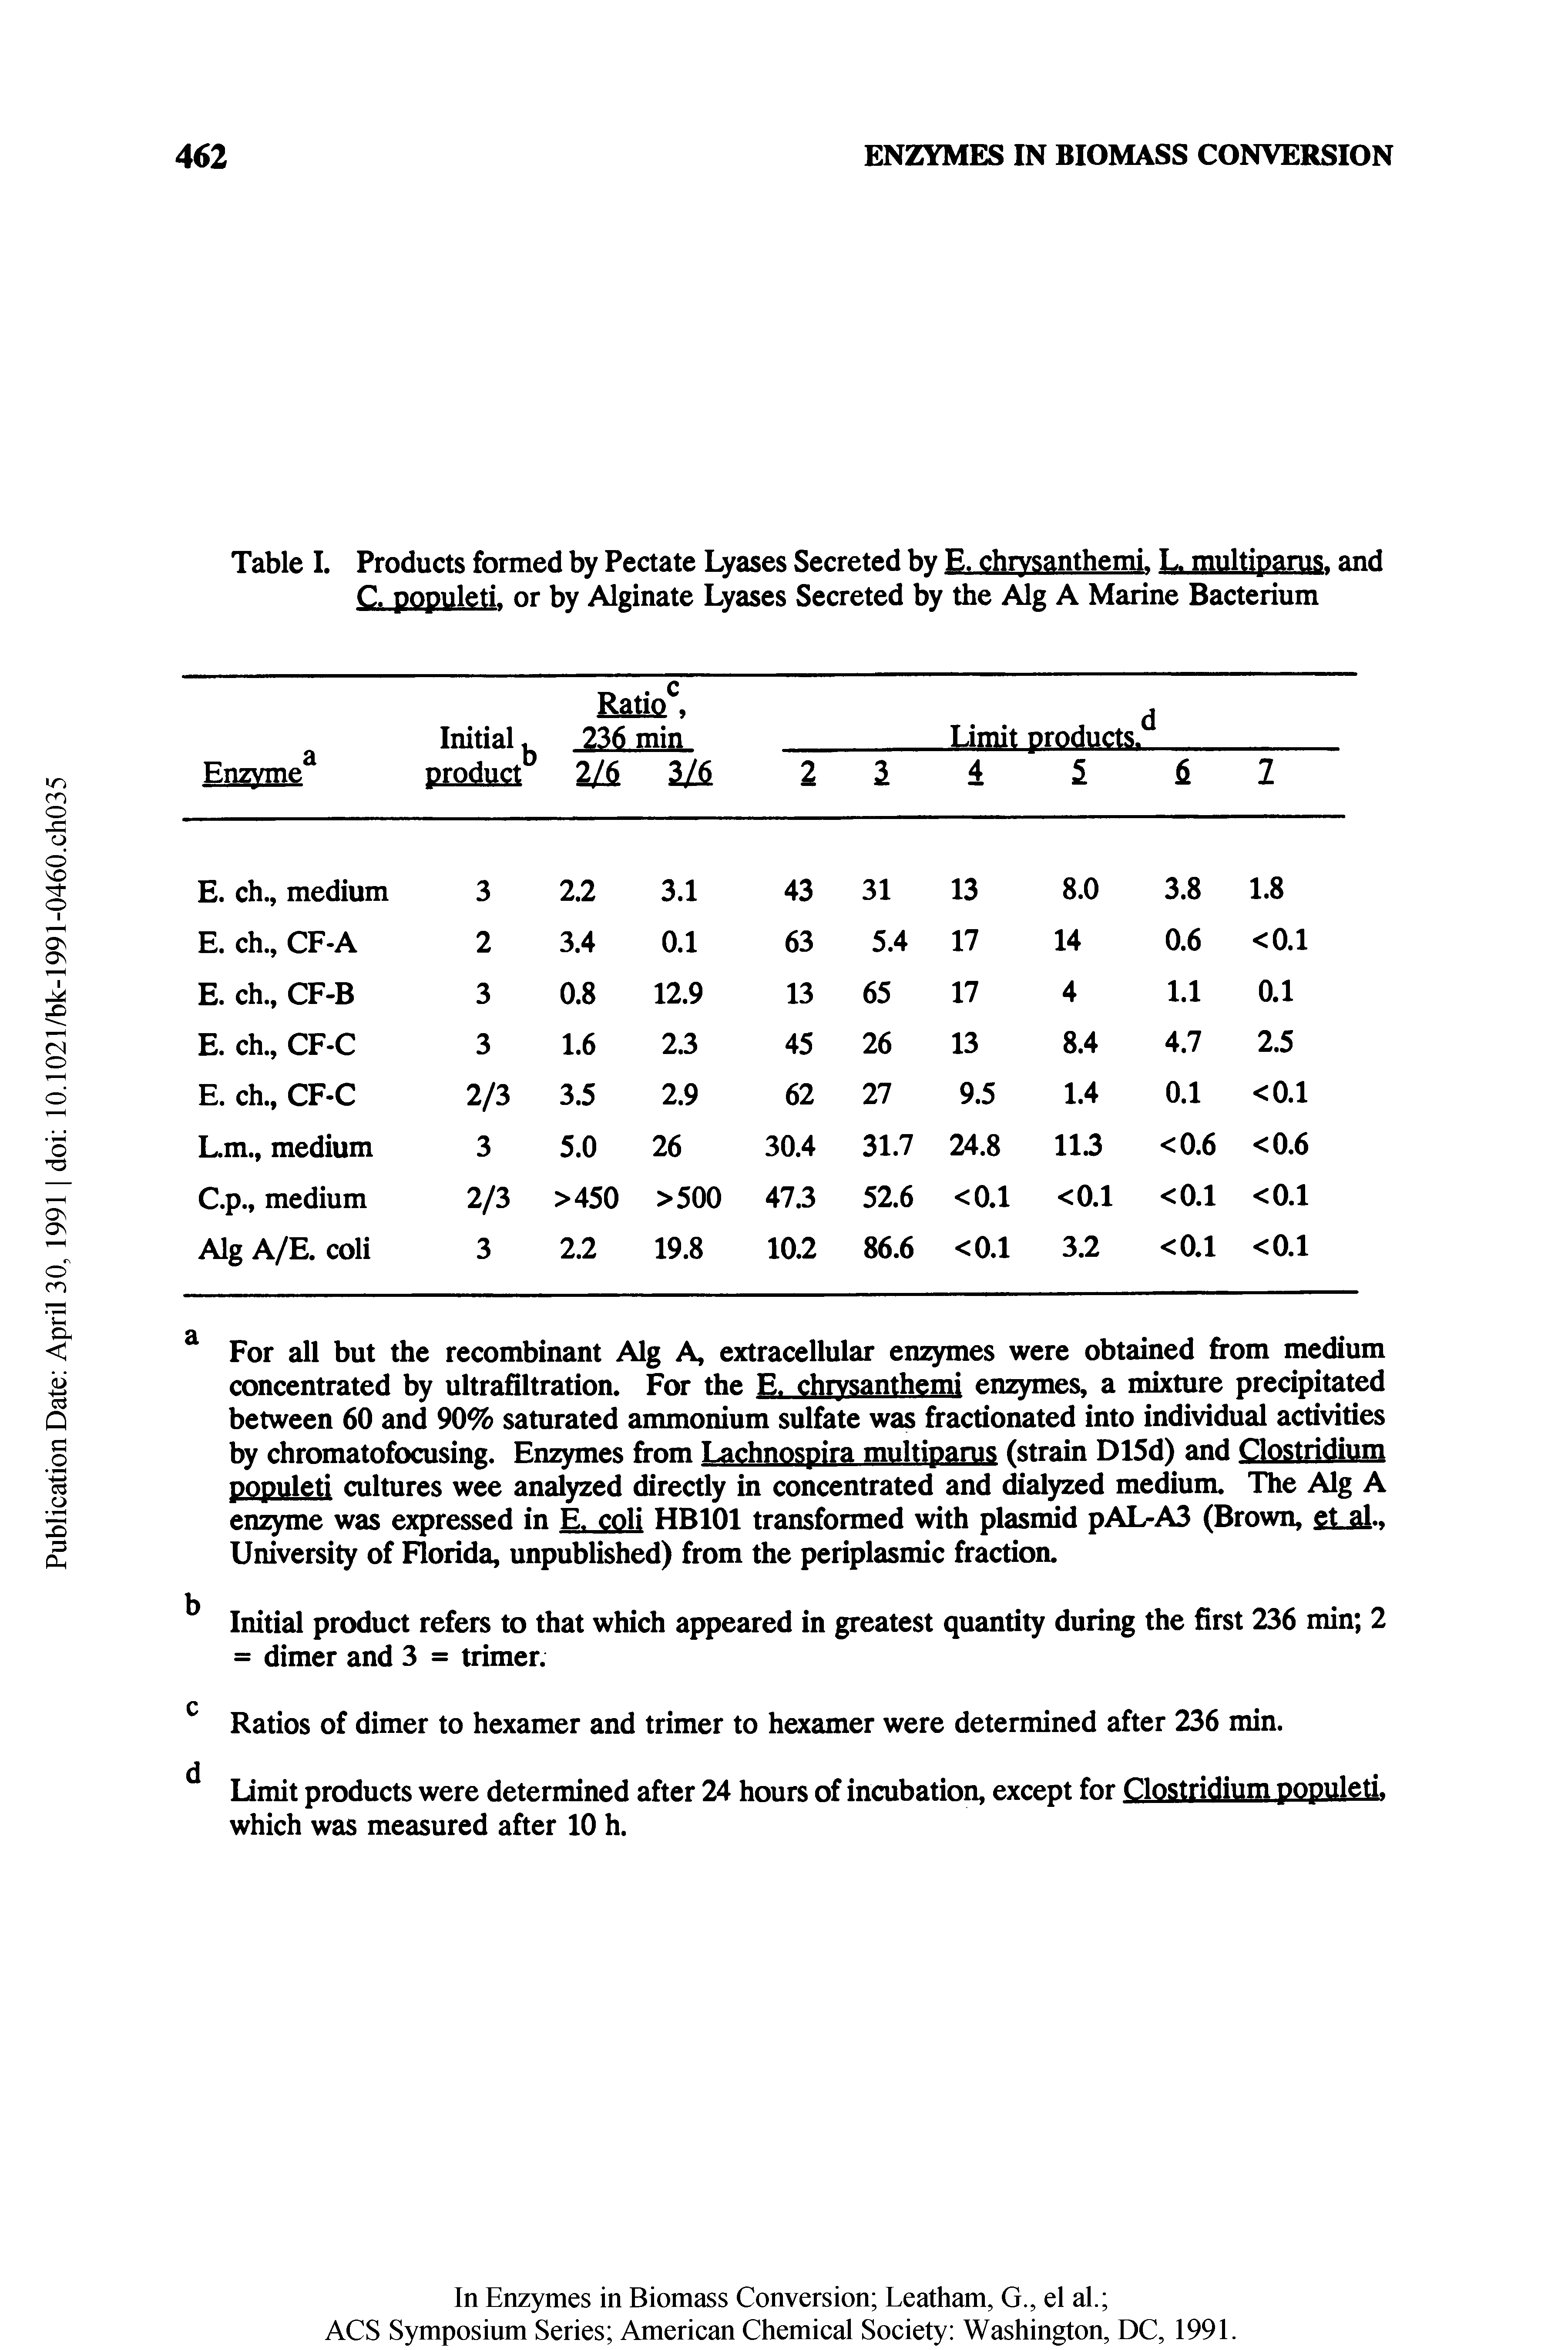 Table I. Products formed by Pectate Lyases Secreted by E. chrvsanthemi. L. multiparus. and C. populeti. or by Alginate Lyases Secreted by the Alg A Marine Bacterium...